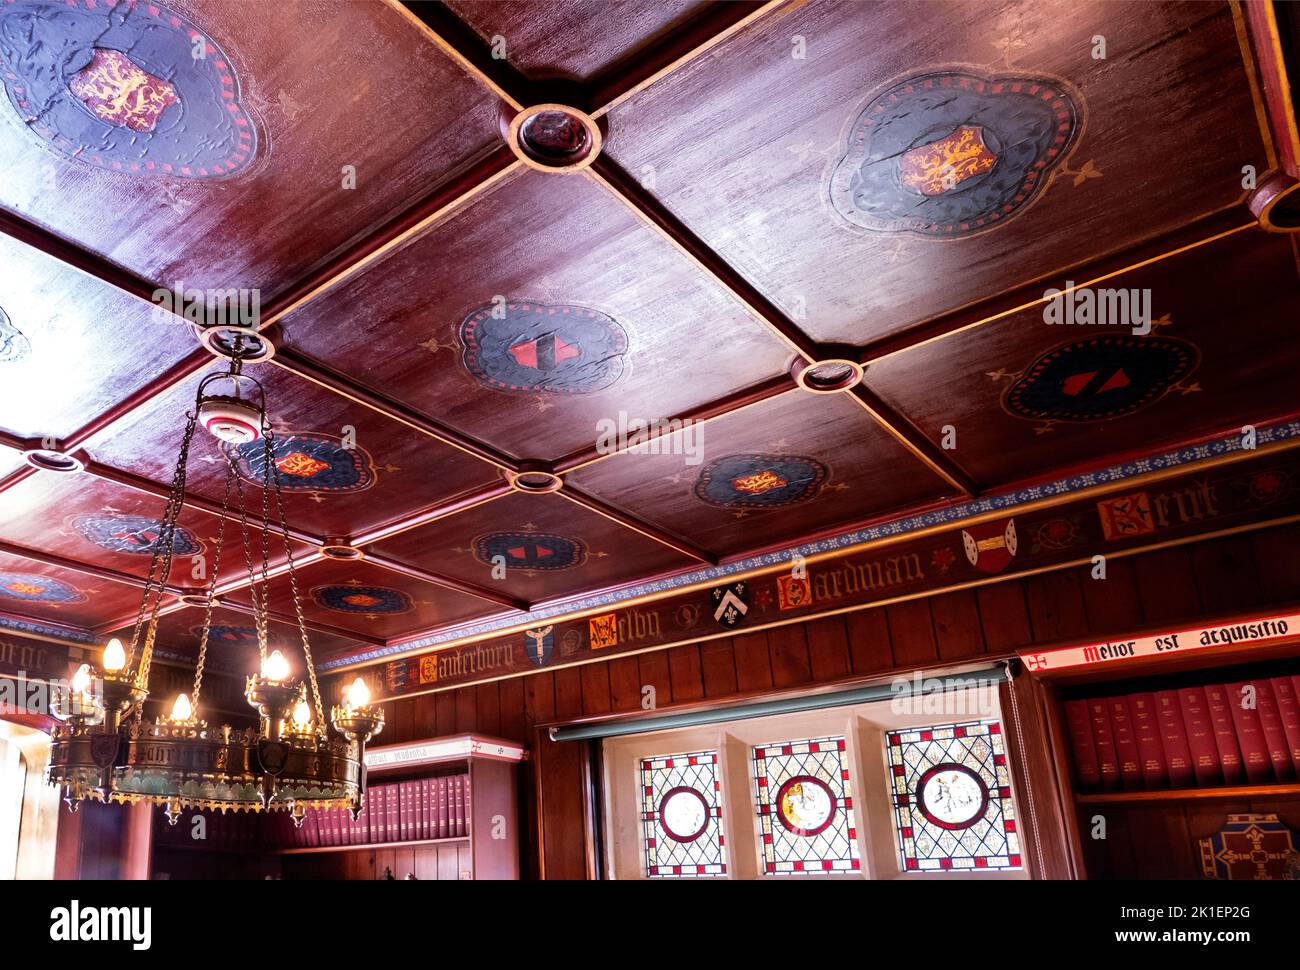 Sitting room ceiling at the Grange , Augustus Pugin's Gothic Revival family home in Ramsgate Kent. Stock Photo